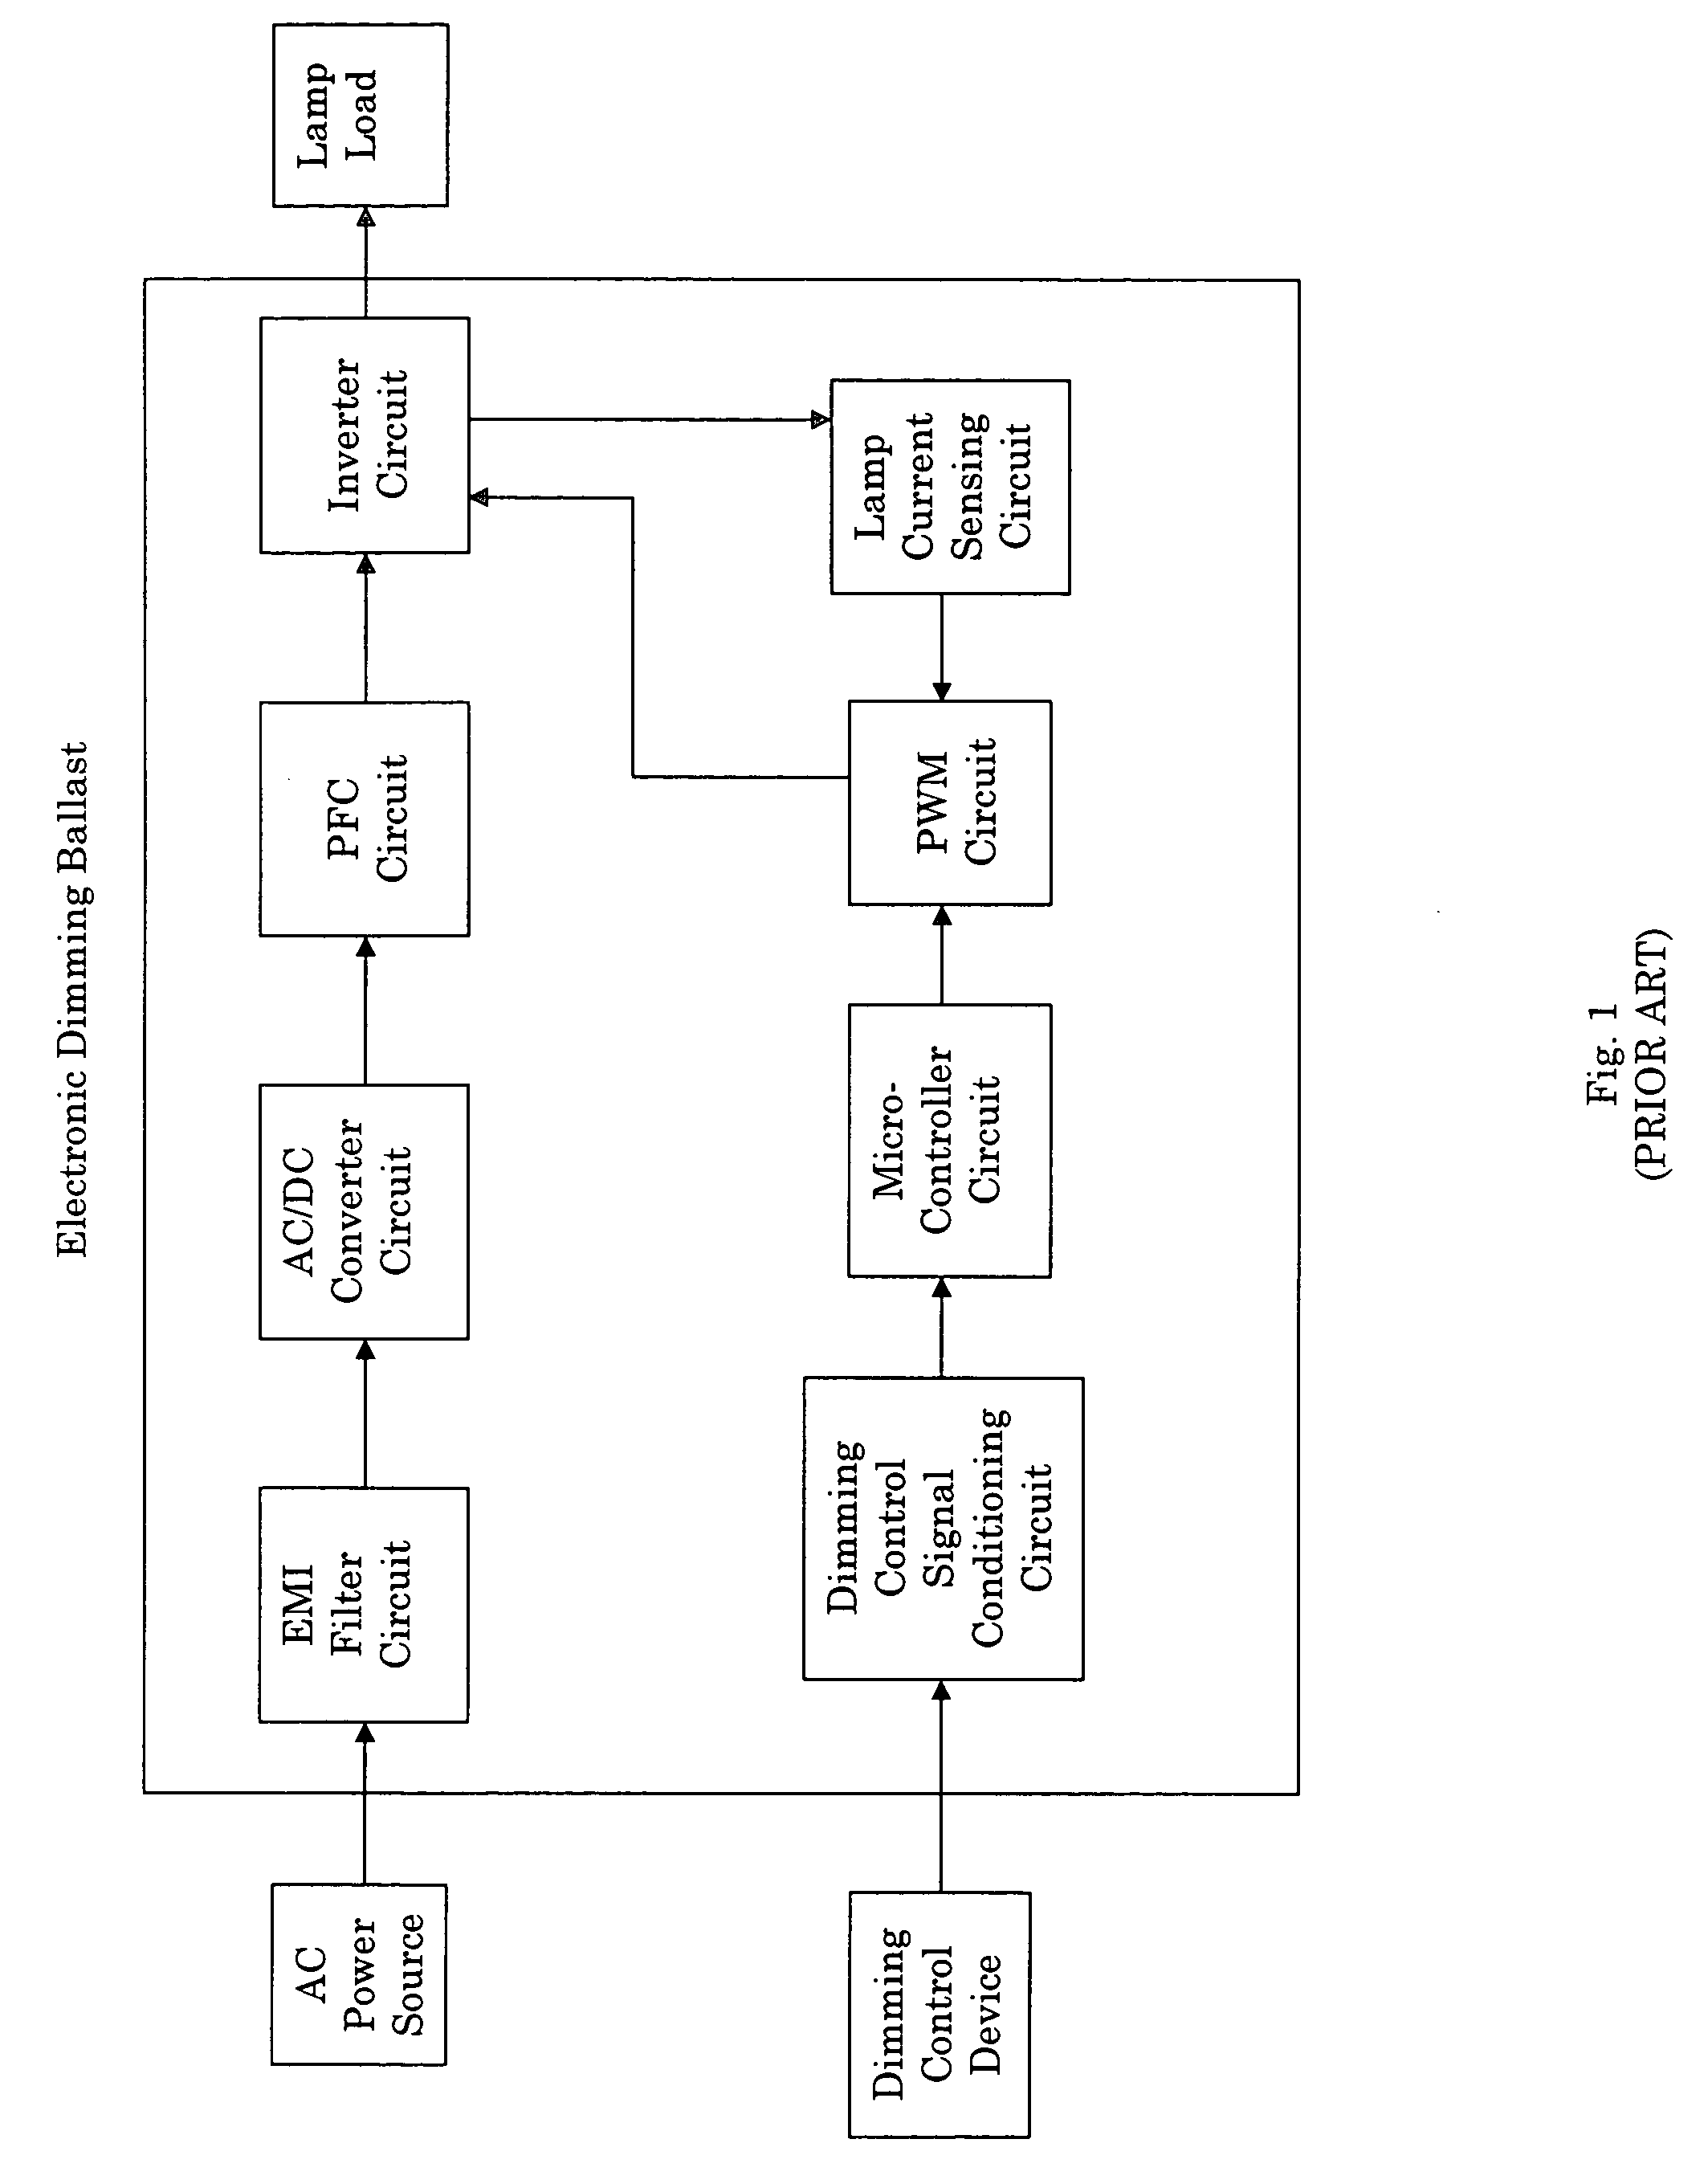 Software controlled electronic dimming ballast